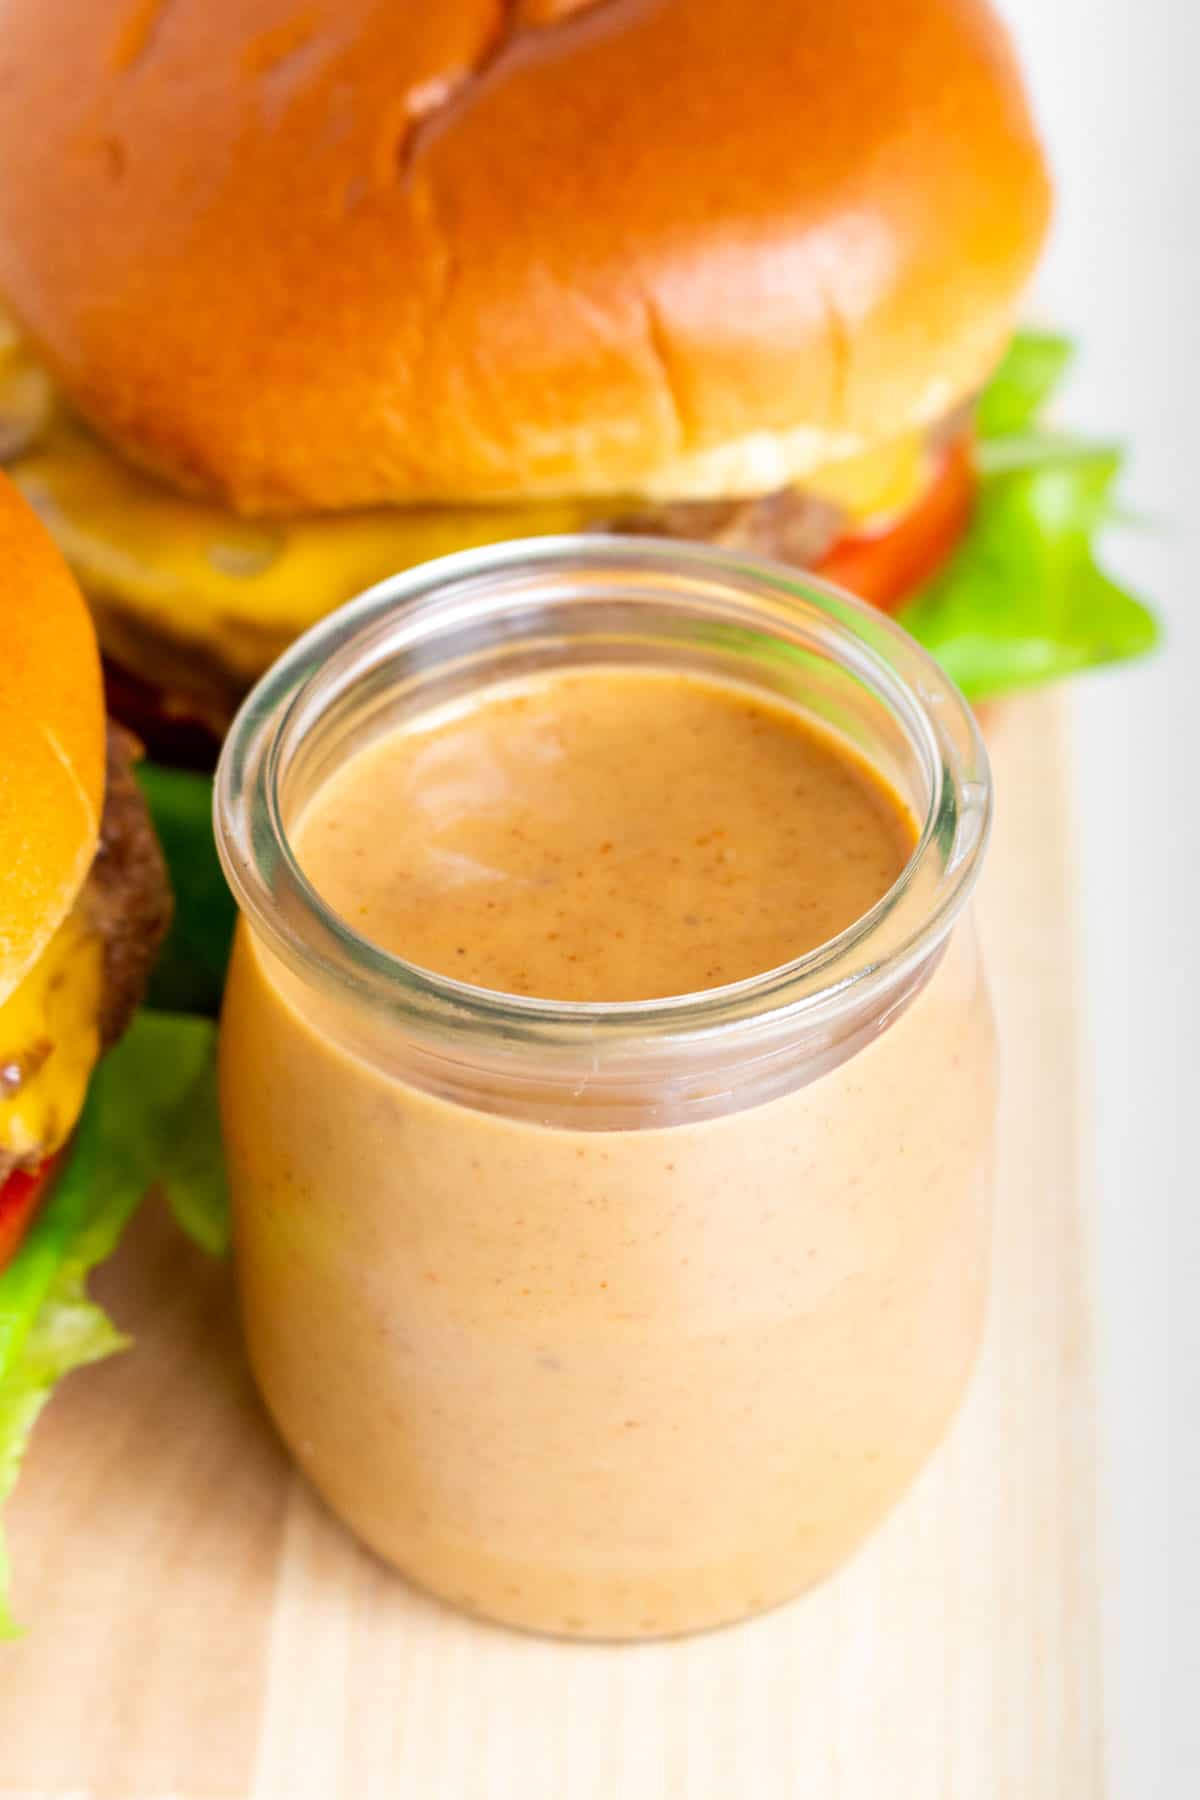 A jar of burger sauce by some burgers.